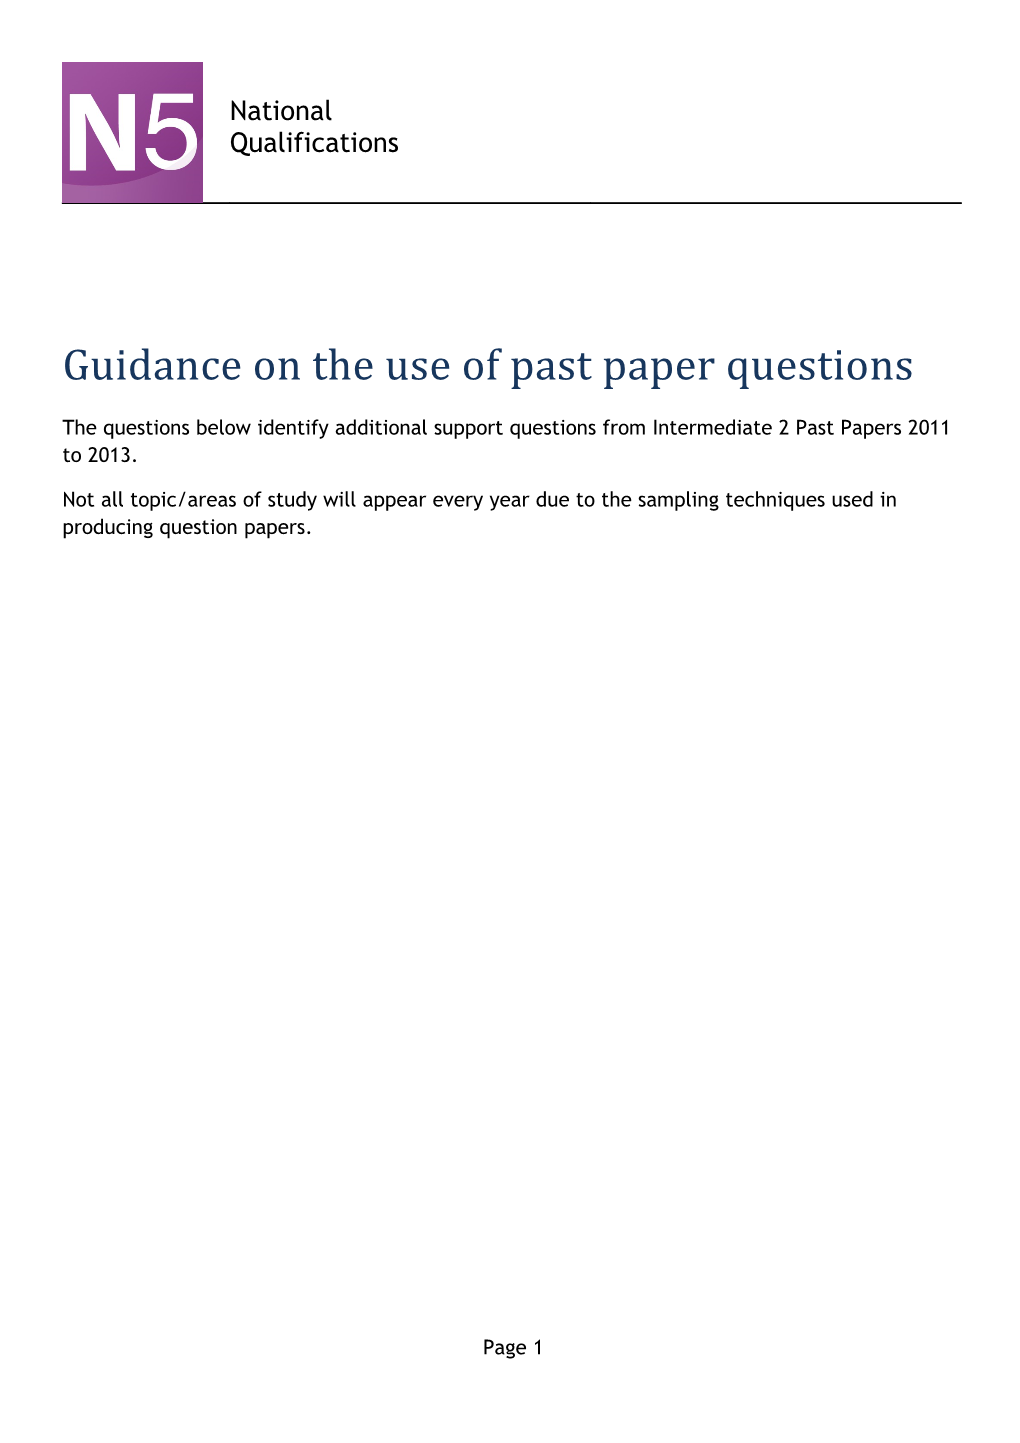 Guidance on the Use of Past Paper Questions